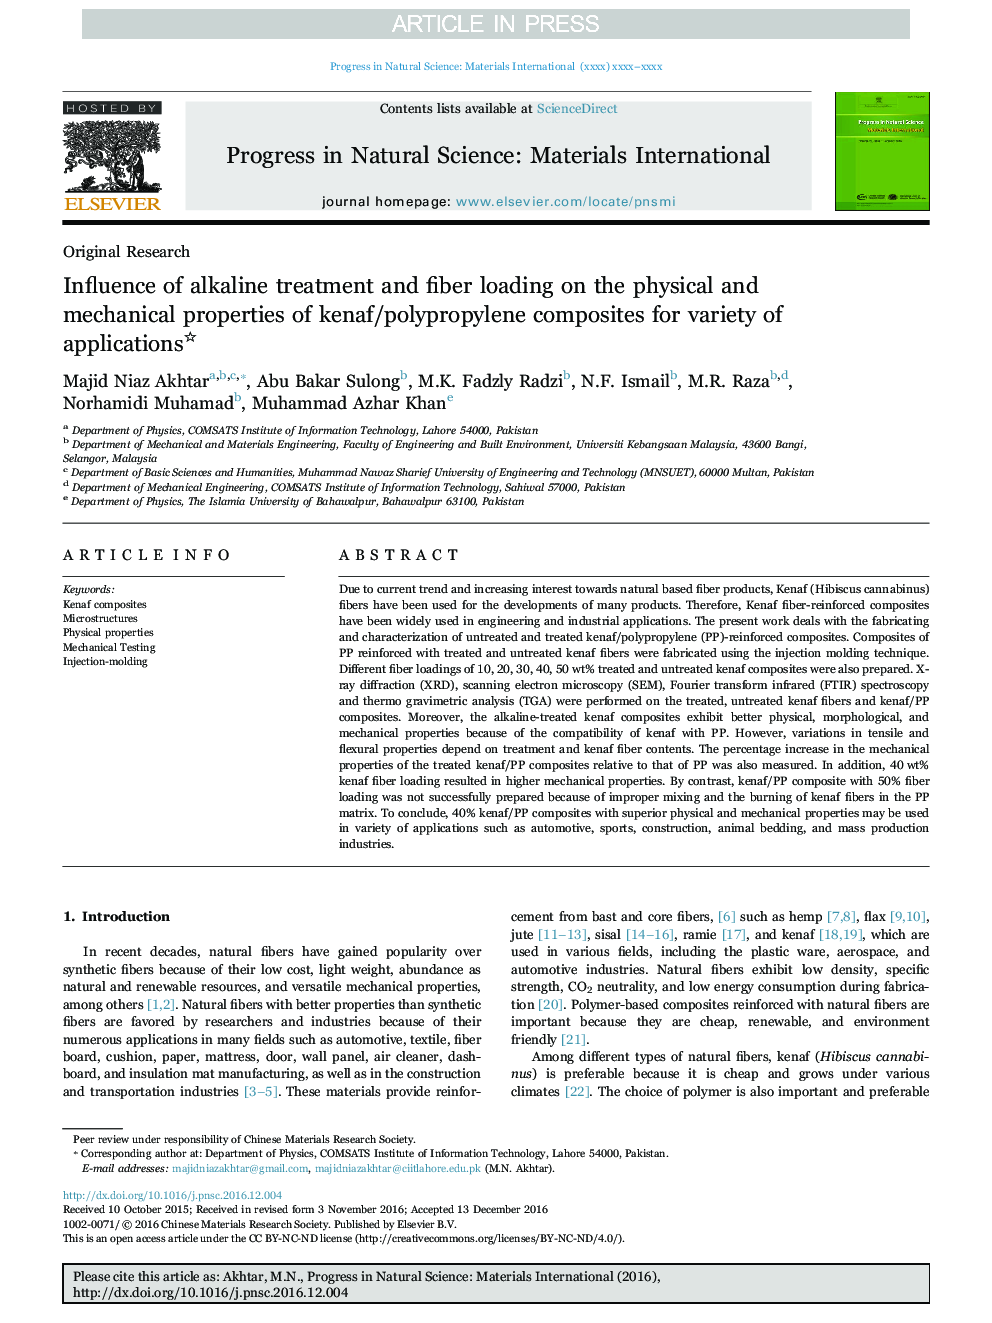 Influence of alkaline treatment and fiber loading on the physical and mechanical properties of kenaf/polypropylene composites for variety of applications